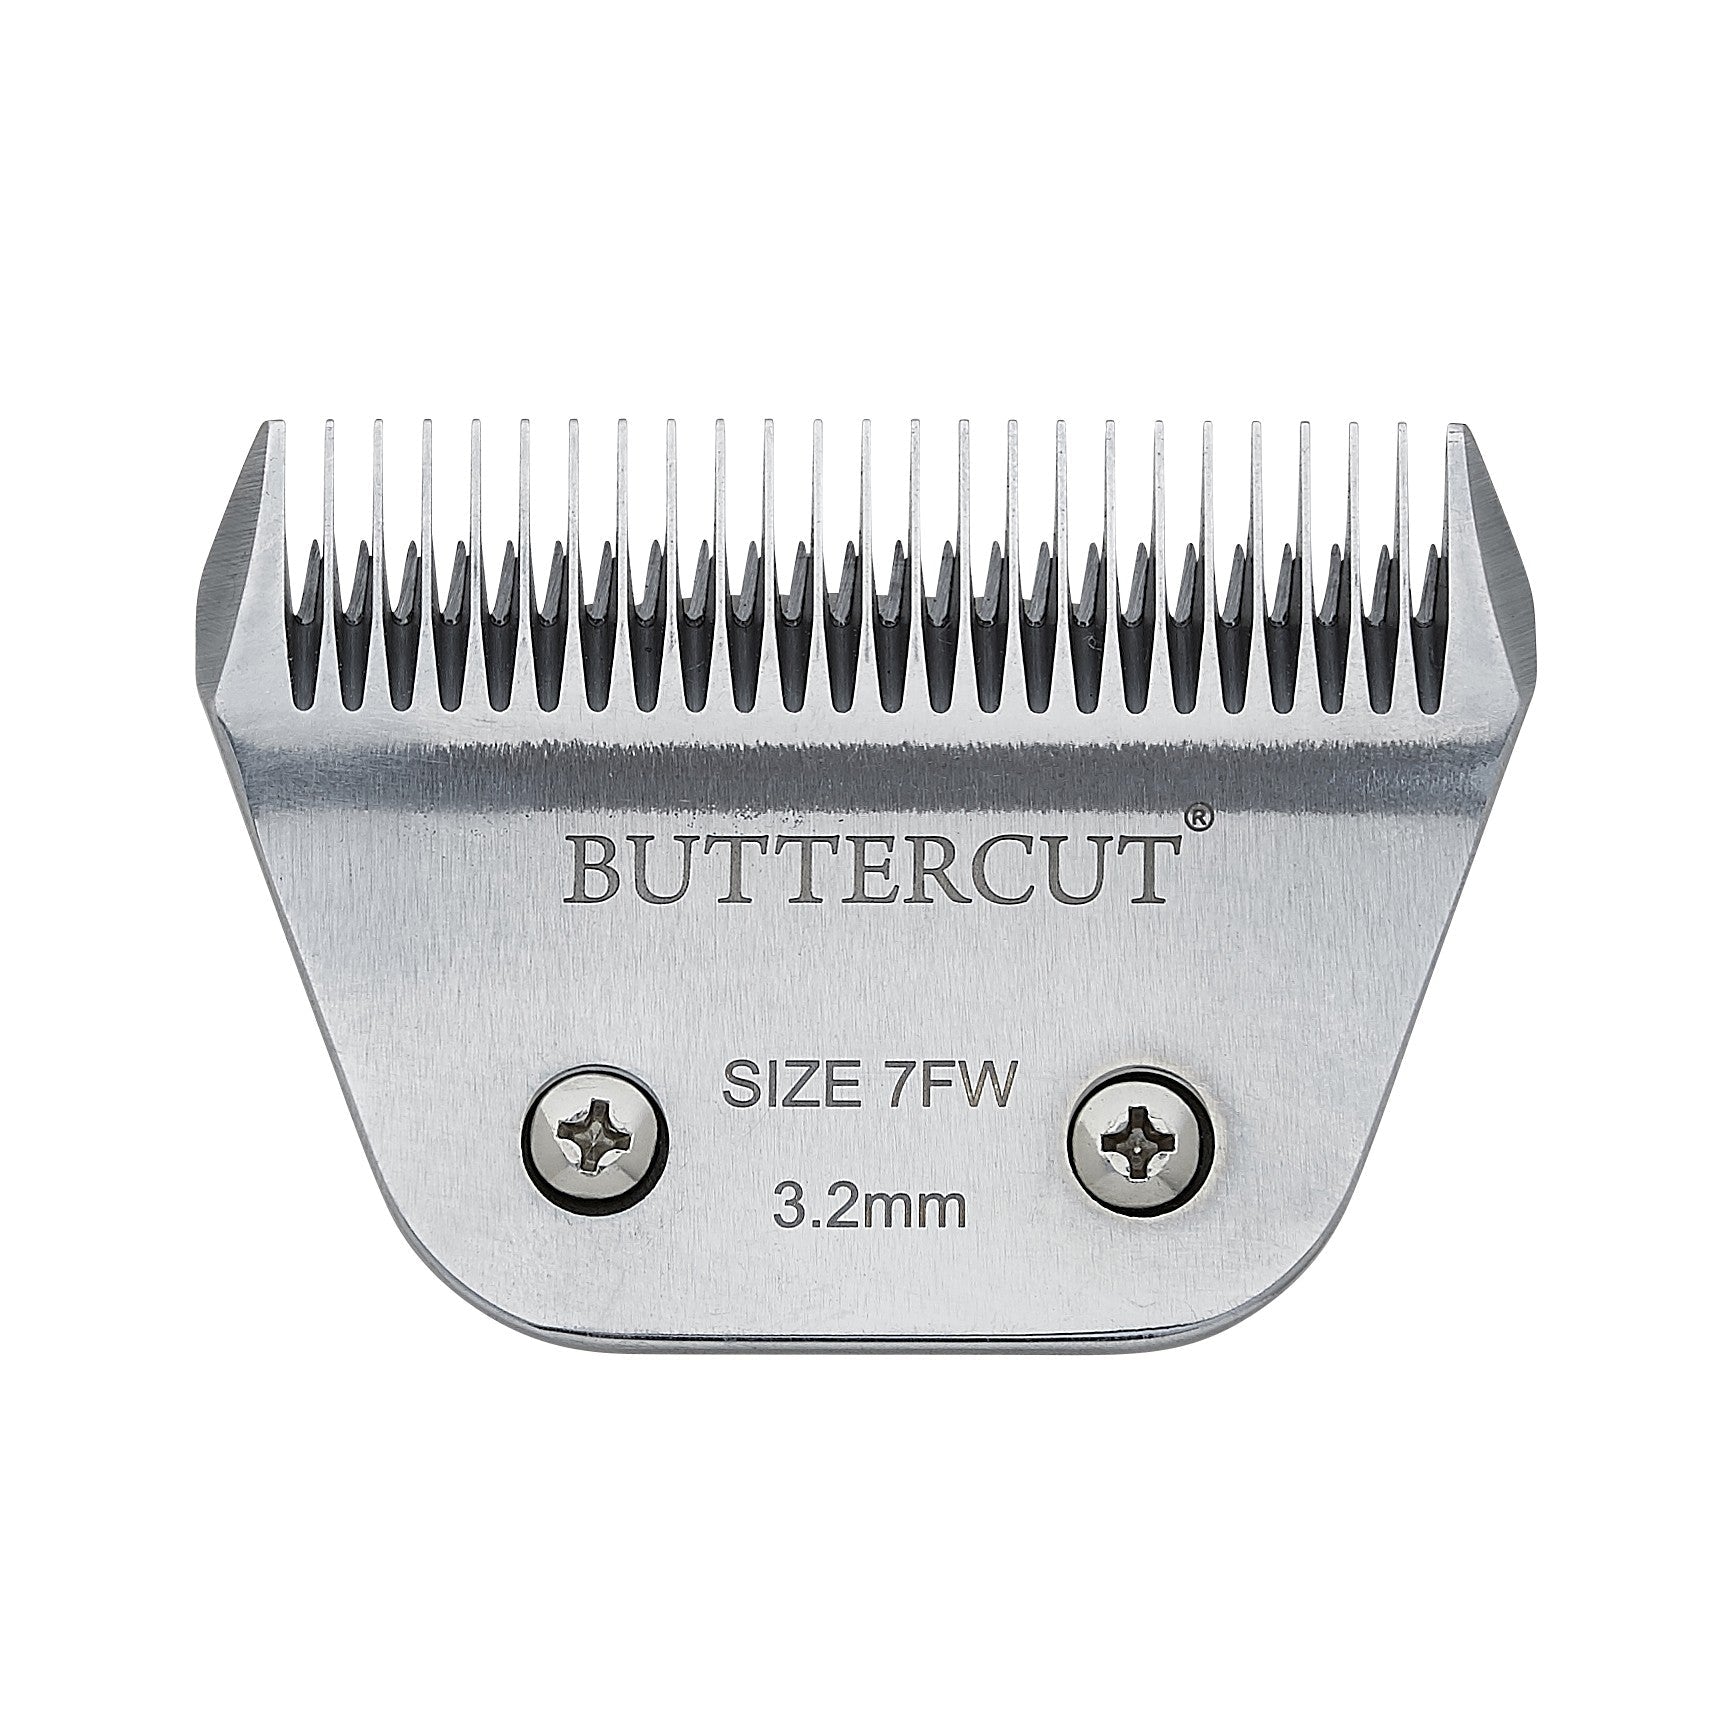 Geib Stainless Steel Buttercut Clipper Blades Fits A5 Style Clippers 7FW